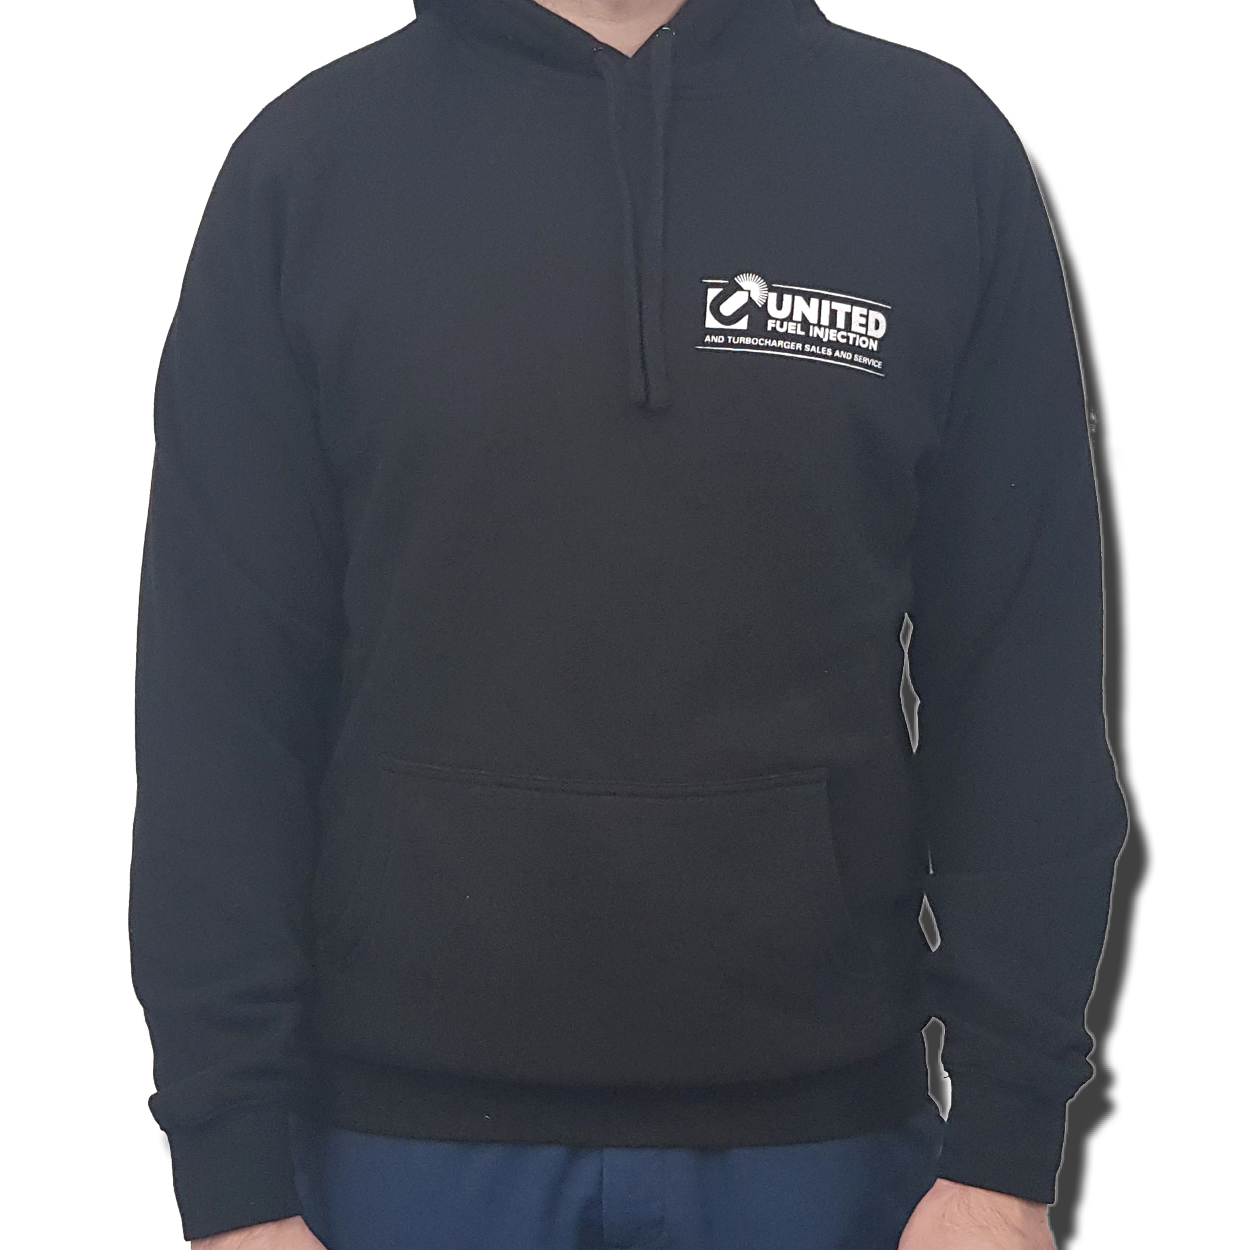 UFI Boosted Hoodie - Extra Extra Large (XXL)